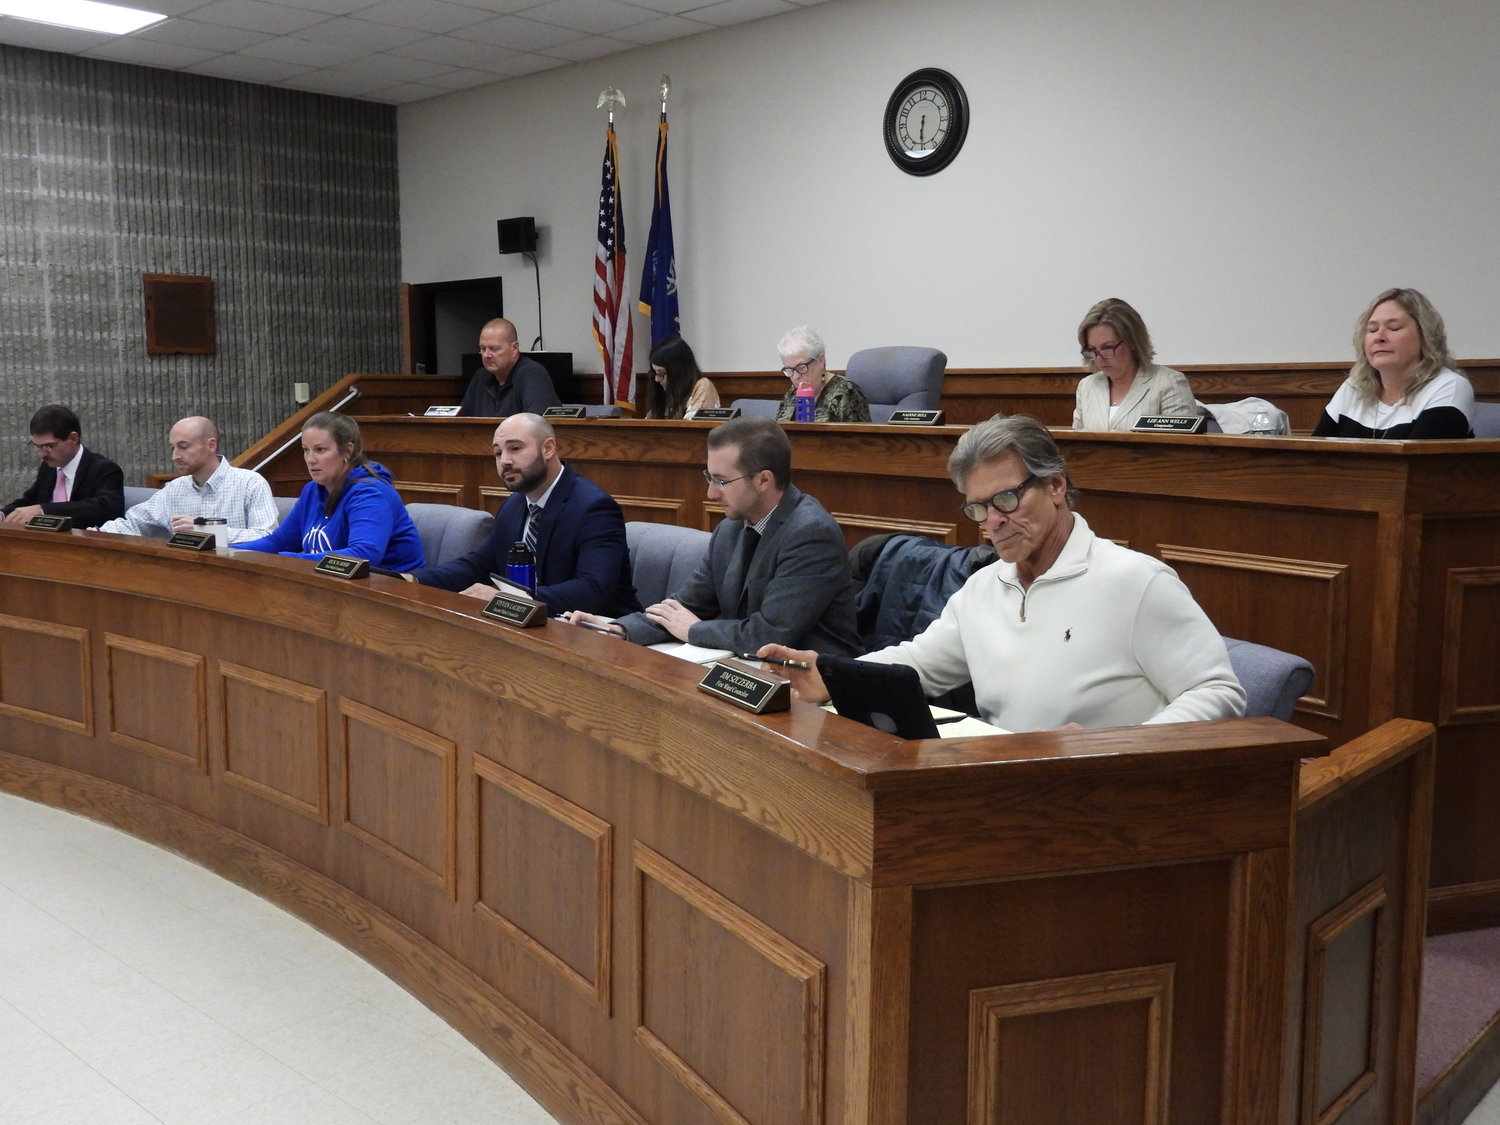 Members of the Oneida Common Council meet on Tuesday in the Council Chambers at Oneida City Hall. Among items before the council included a proposal to exceed the state’s property tax cap if necessary as well as a six-month moratorium on new smoke shops in the city.